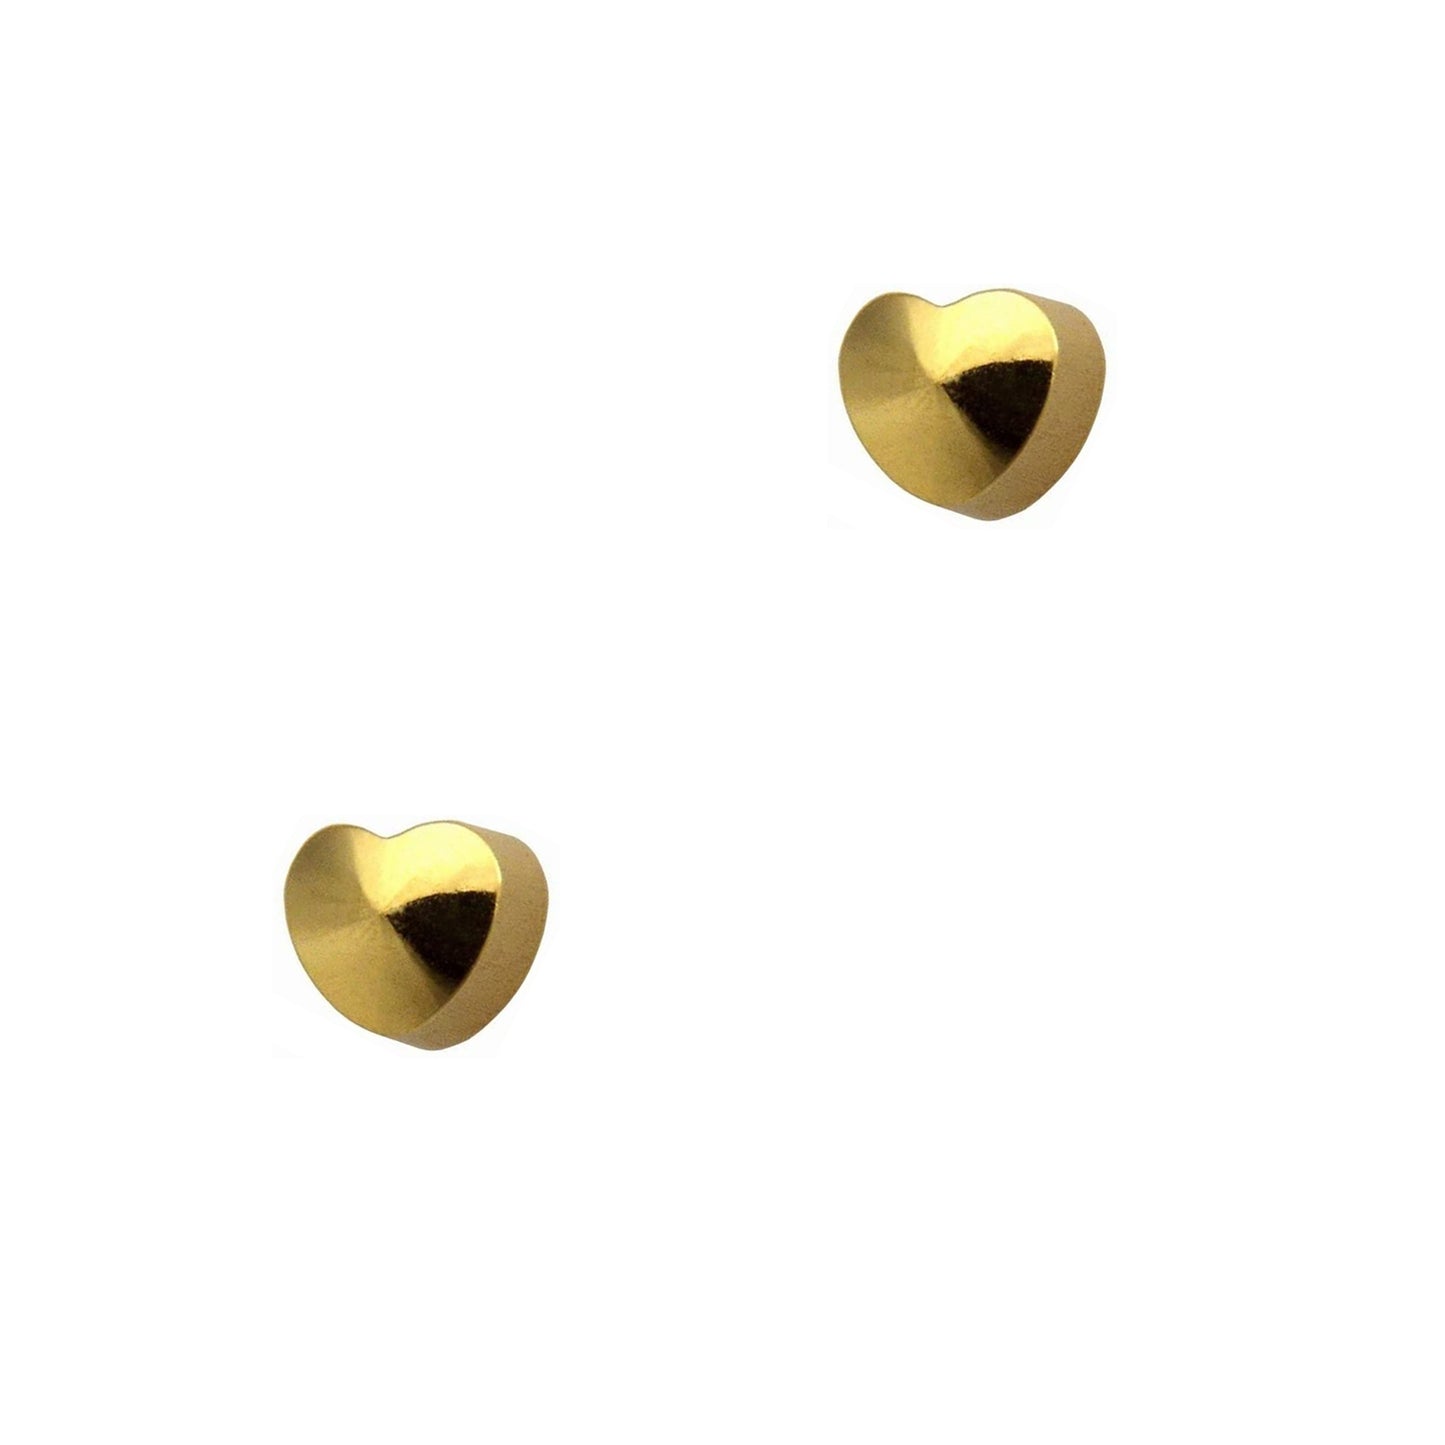 STUDEX MINI Gold Plated Heart and Star Shaped Earrings